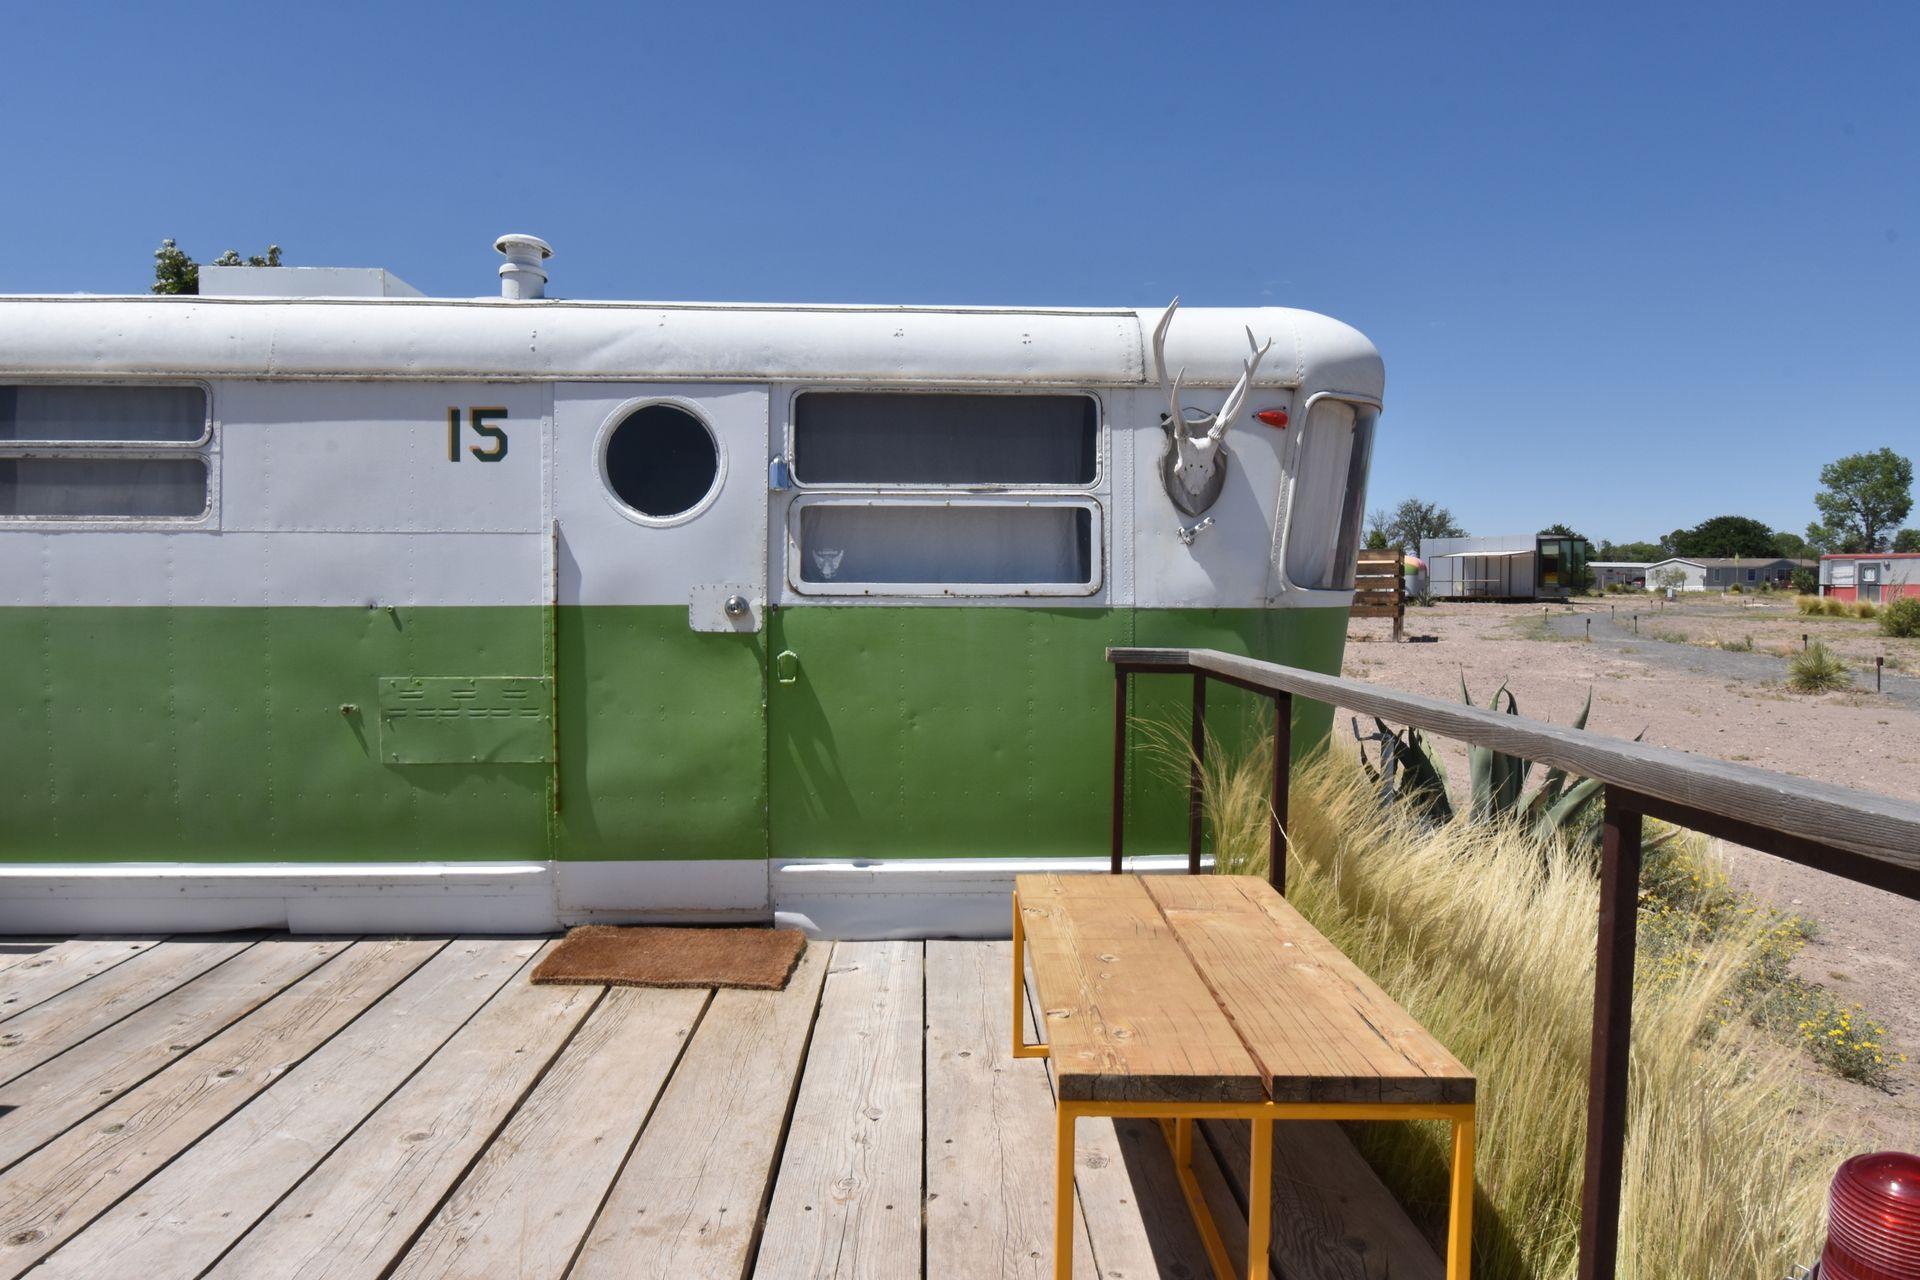 A green and white trailer with a wooden deck in front of it. The trailer is labeled '15' and there is a white longhorn head on the front of the trailer.